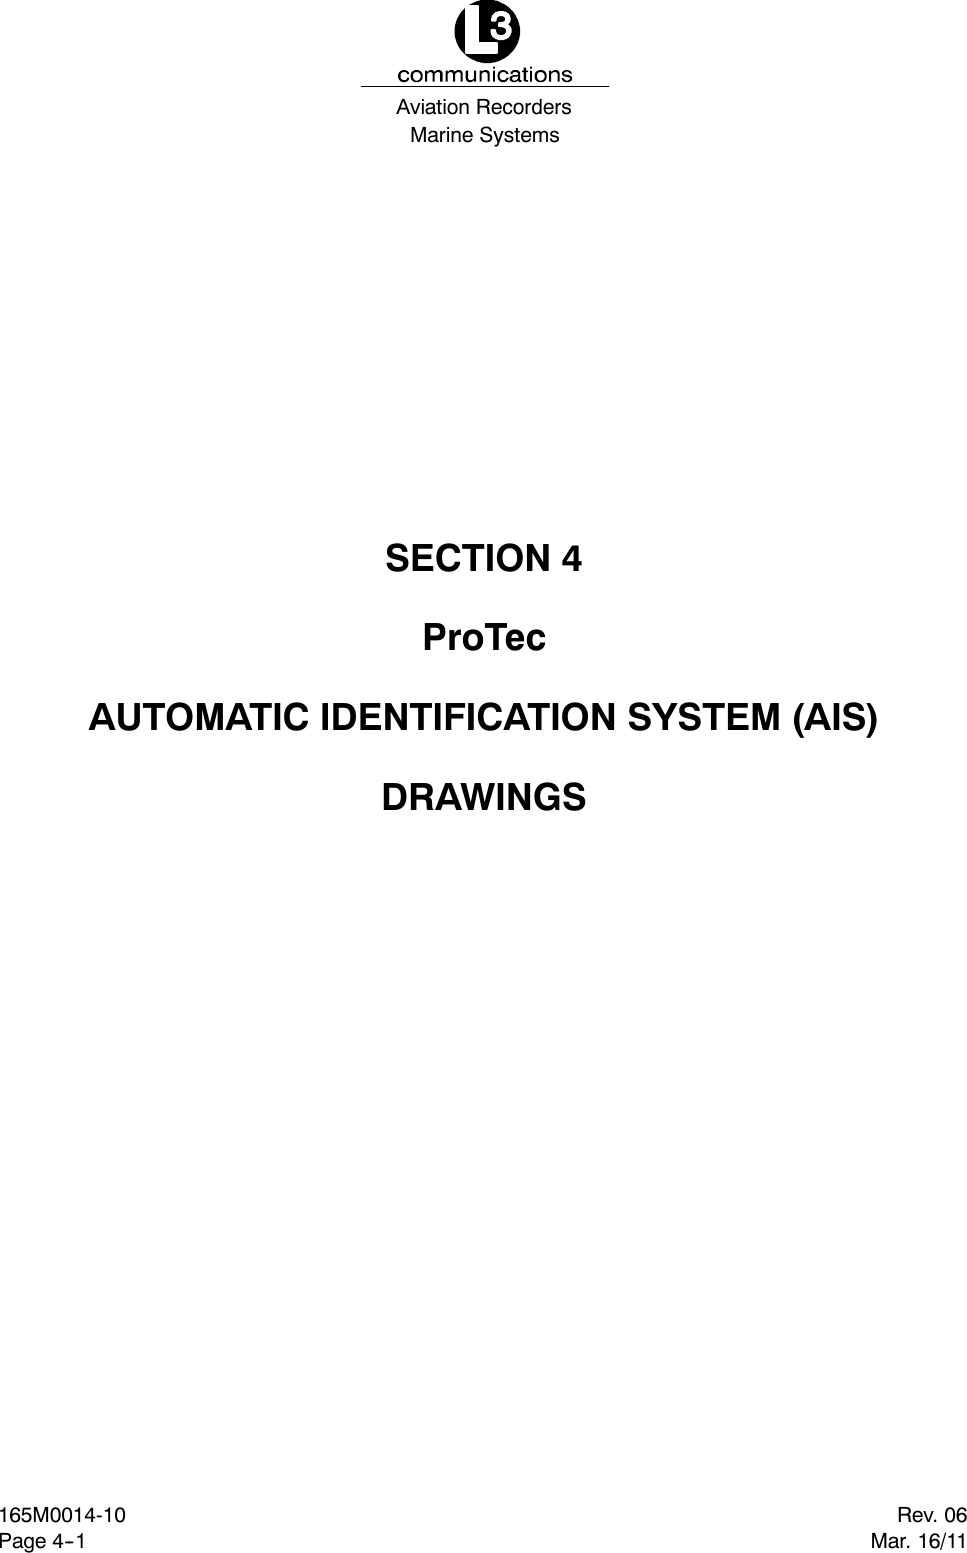 Marine SystemsAviation RecordersRev. 06Mar. 16/11165M0014-10Page 4--1SECTION 4ProTecAUTOMATIC IDENTIFICATION SYSTEM (AIS)DRAWINGS